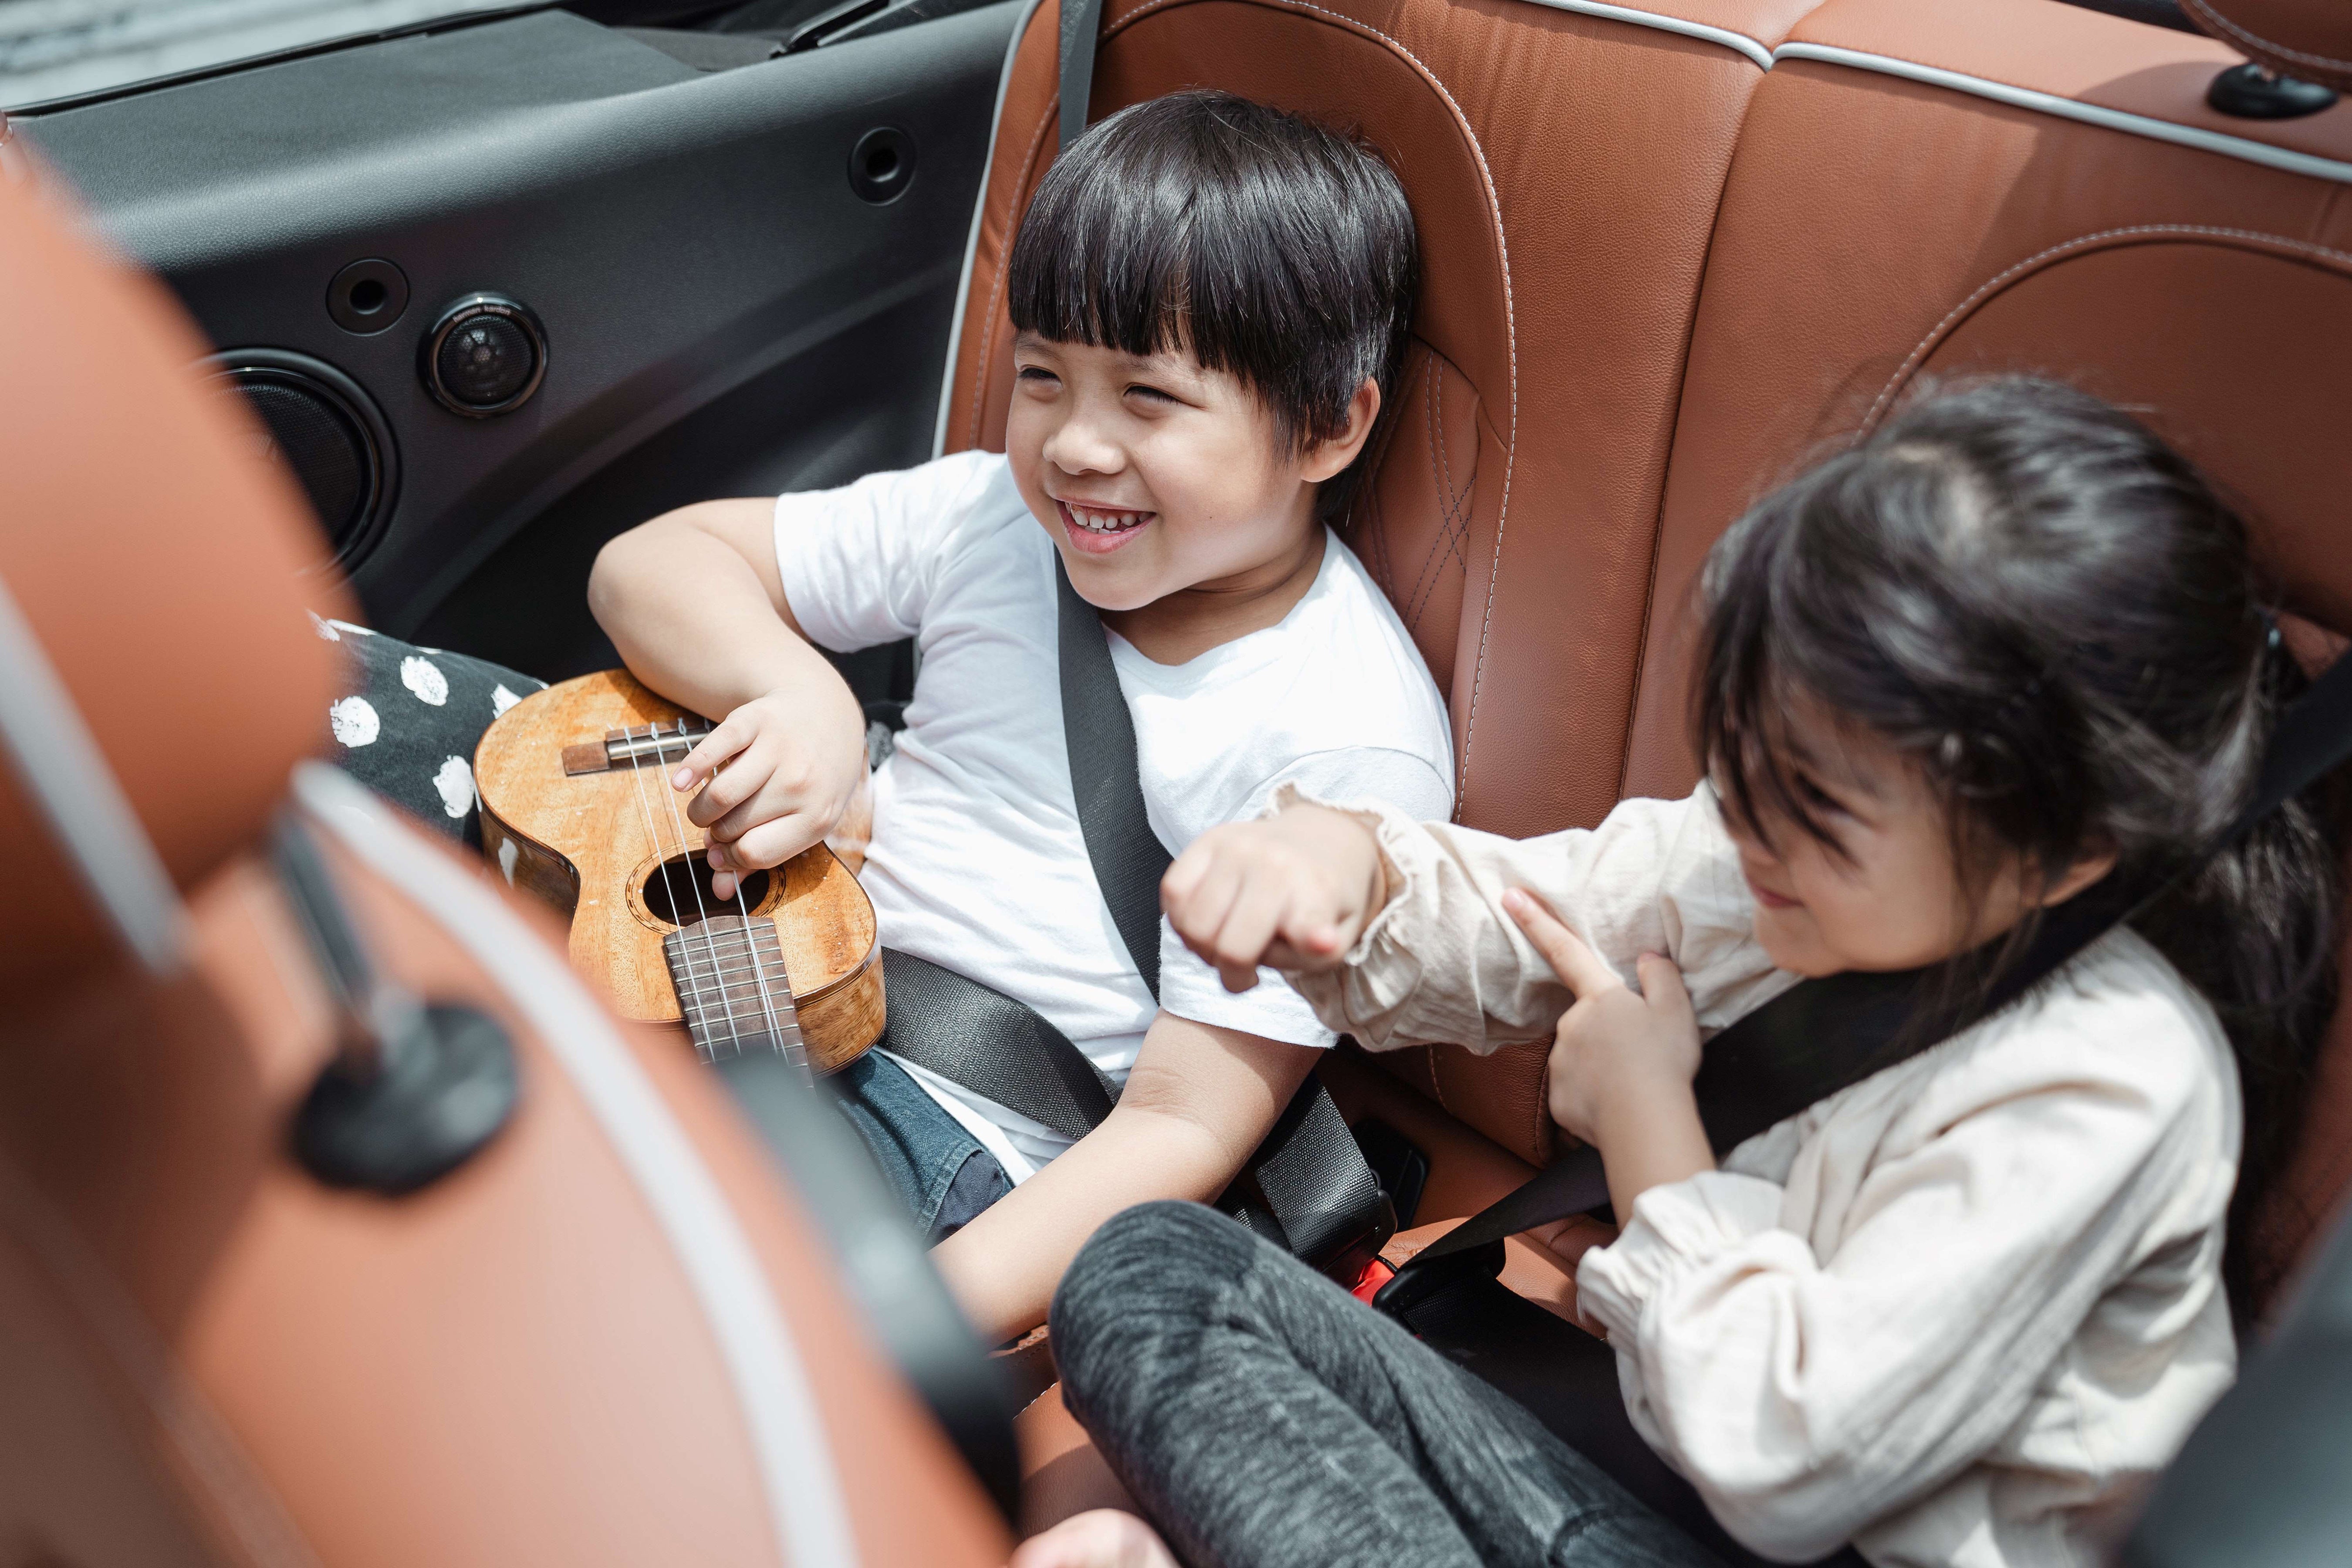 Image of two children in a backseat, one is holding a ukelele and both are laughing